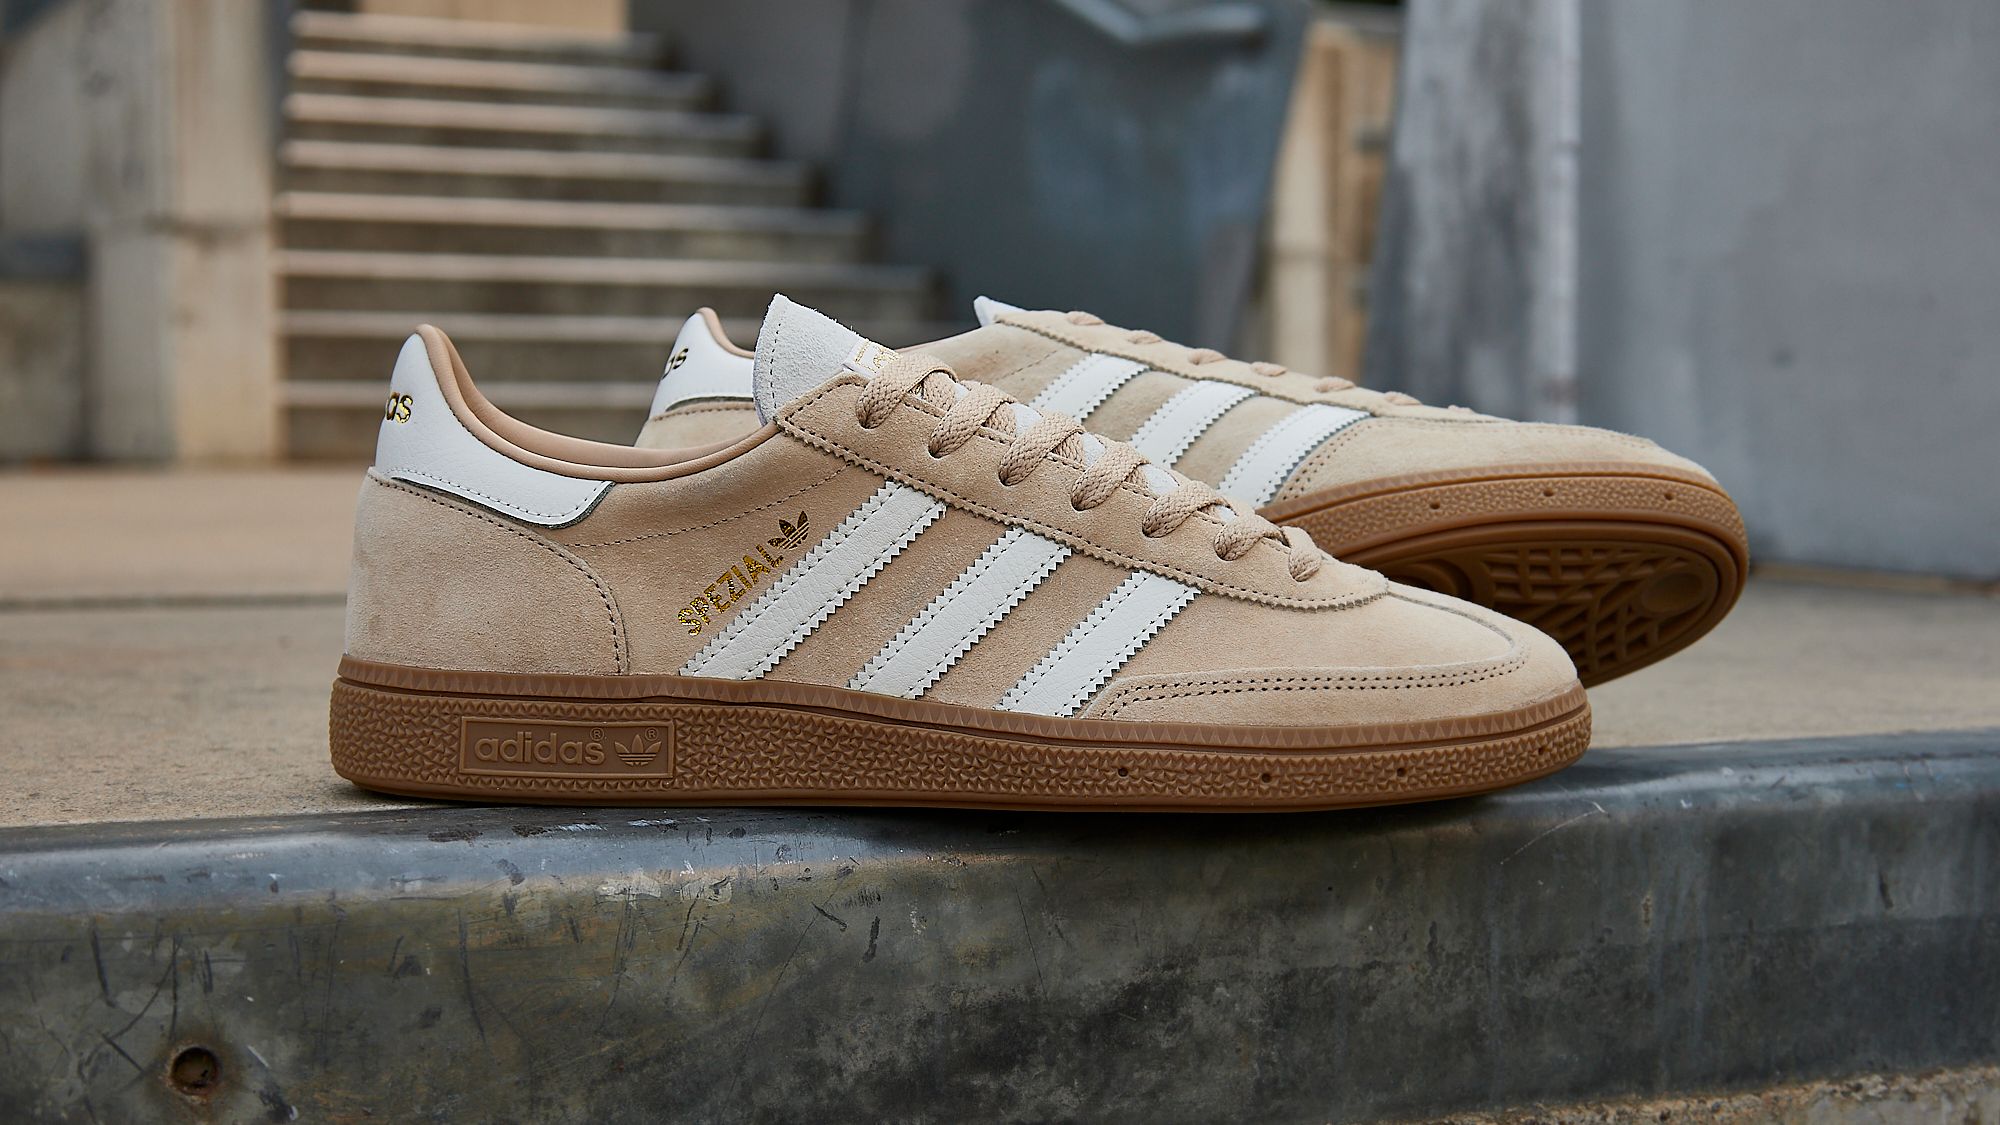 Go Full 'Casual' With the Freshest adidas Handball Spezials at JD Sports